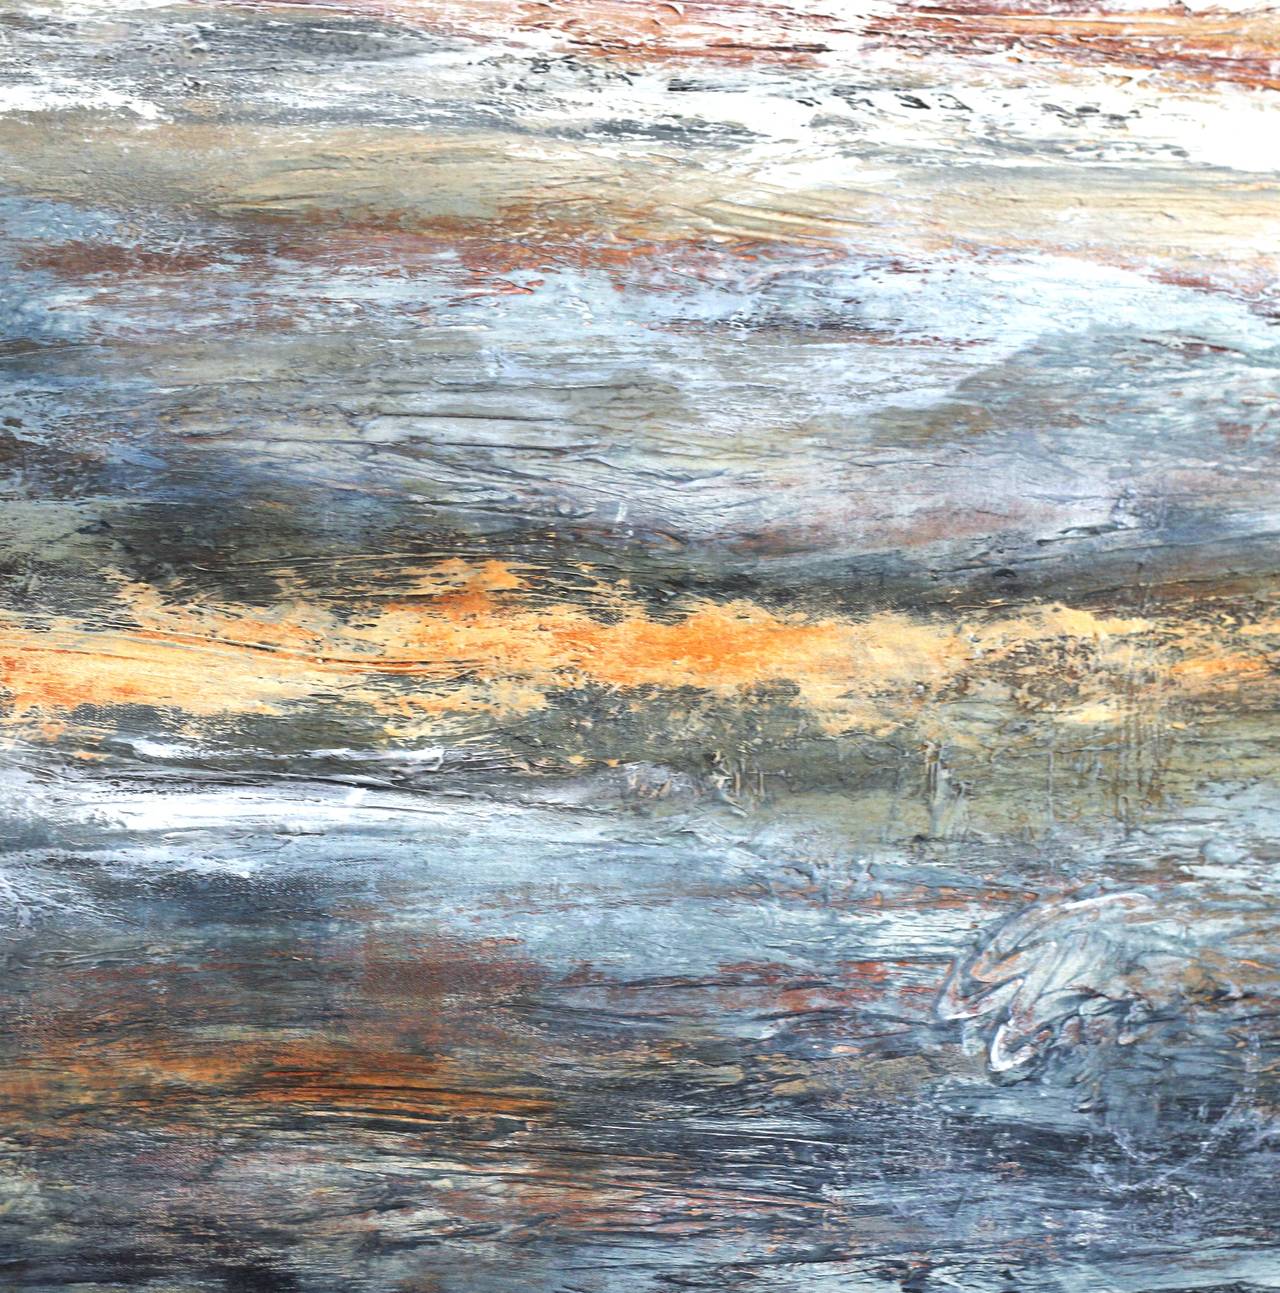 Clara Berta is a passionate, award-winning mixed-media artist of Hungarian heritage. Inspired by her love of nature, her highly textural abstract works often evoke the deep blues of the ocean, or the golden glow of a Tuscan sunset.

Berta’s